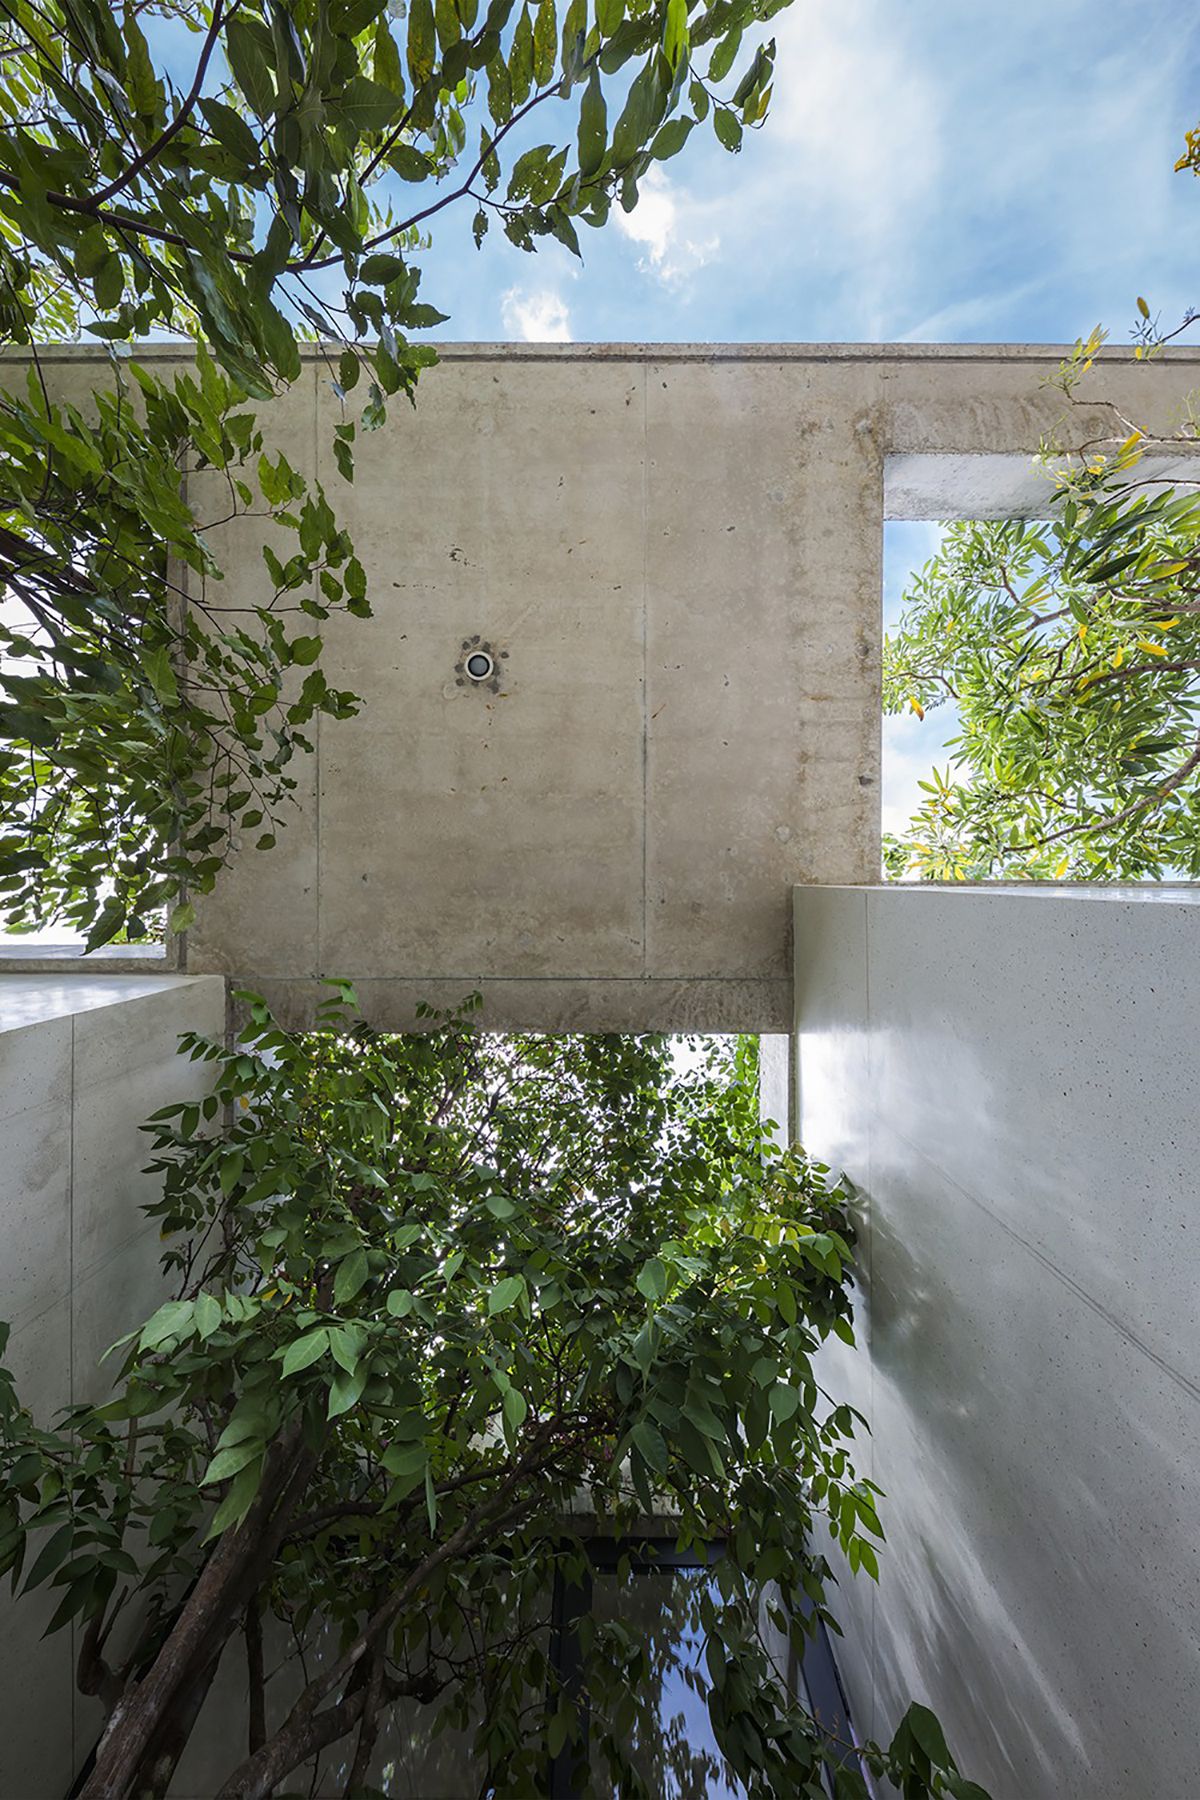 kienviet Truong Dai Hoc FPT Ha Noi va Stacked Planter House cua Vo Trong Nghia Architects VTN Architects gianh chien thang tai World Architecture Awards lan thu 42 17